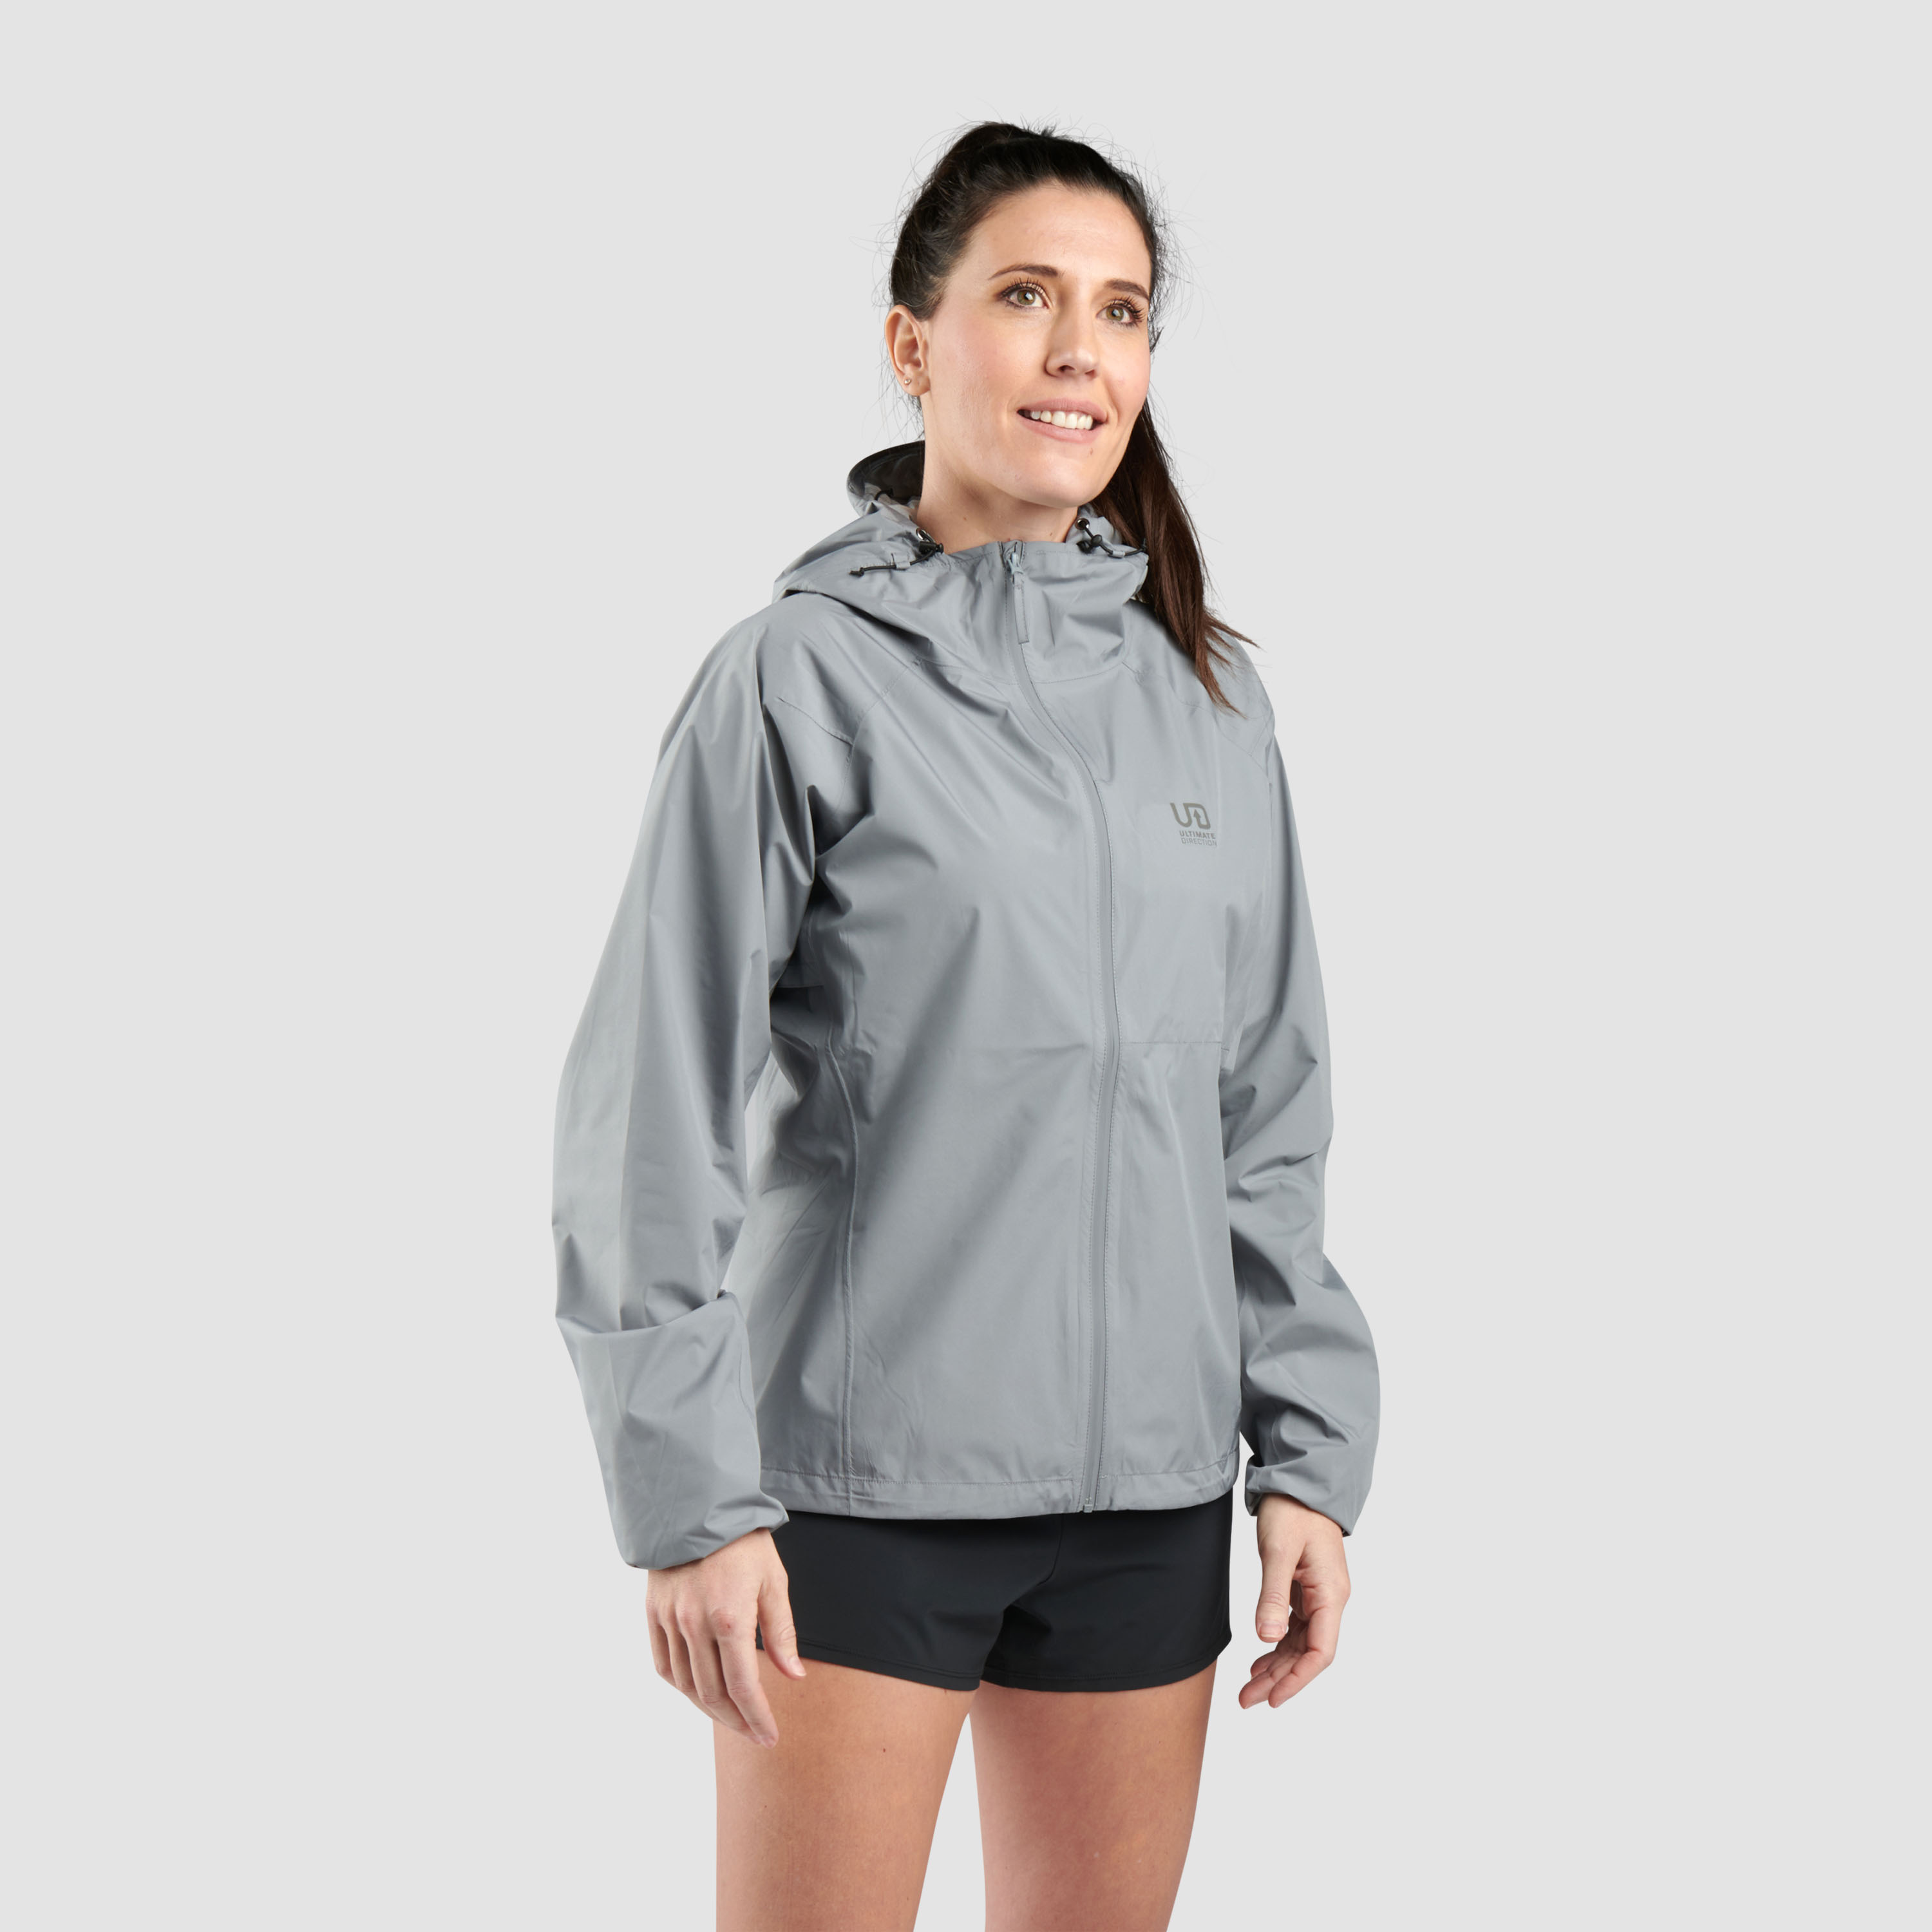 Ultimate Direction Women's Deluge Jacket in Gray Size Medium